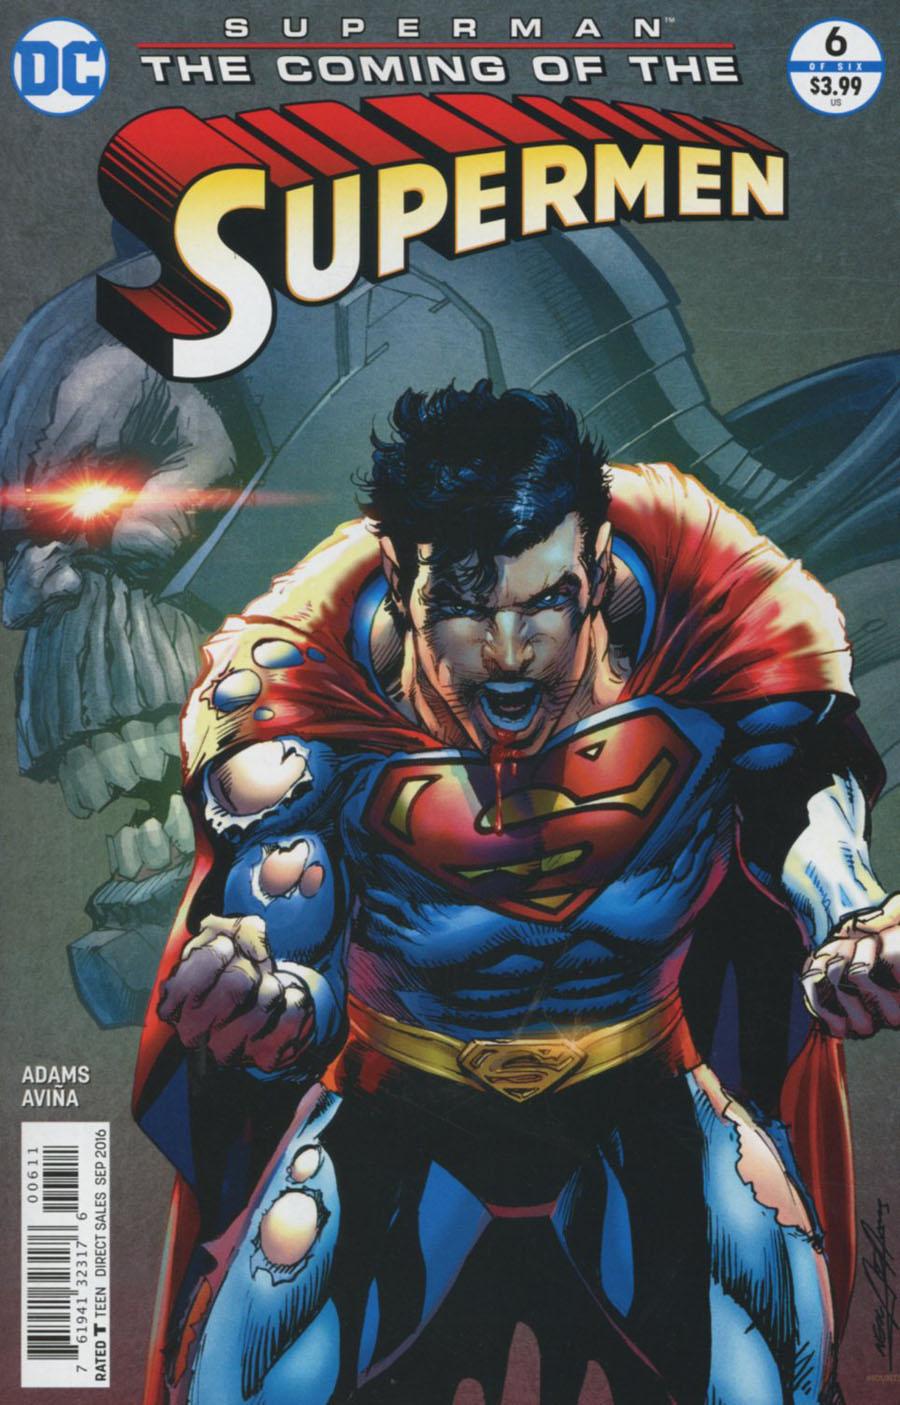 Superman The Coming Of The Supermen Vol. 1 #6